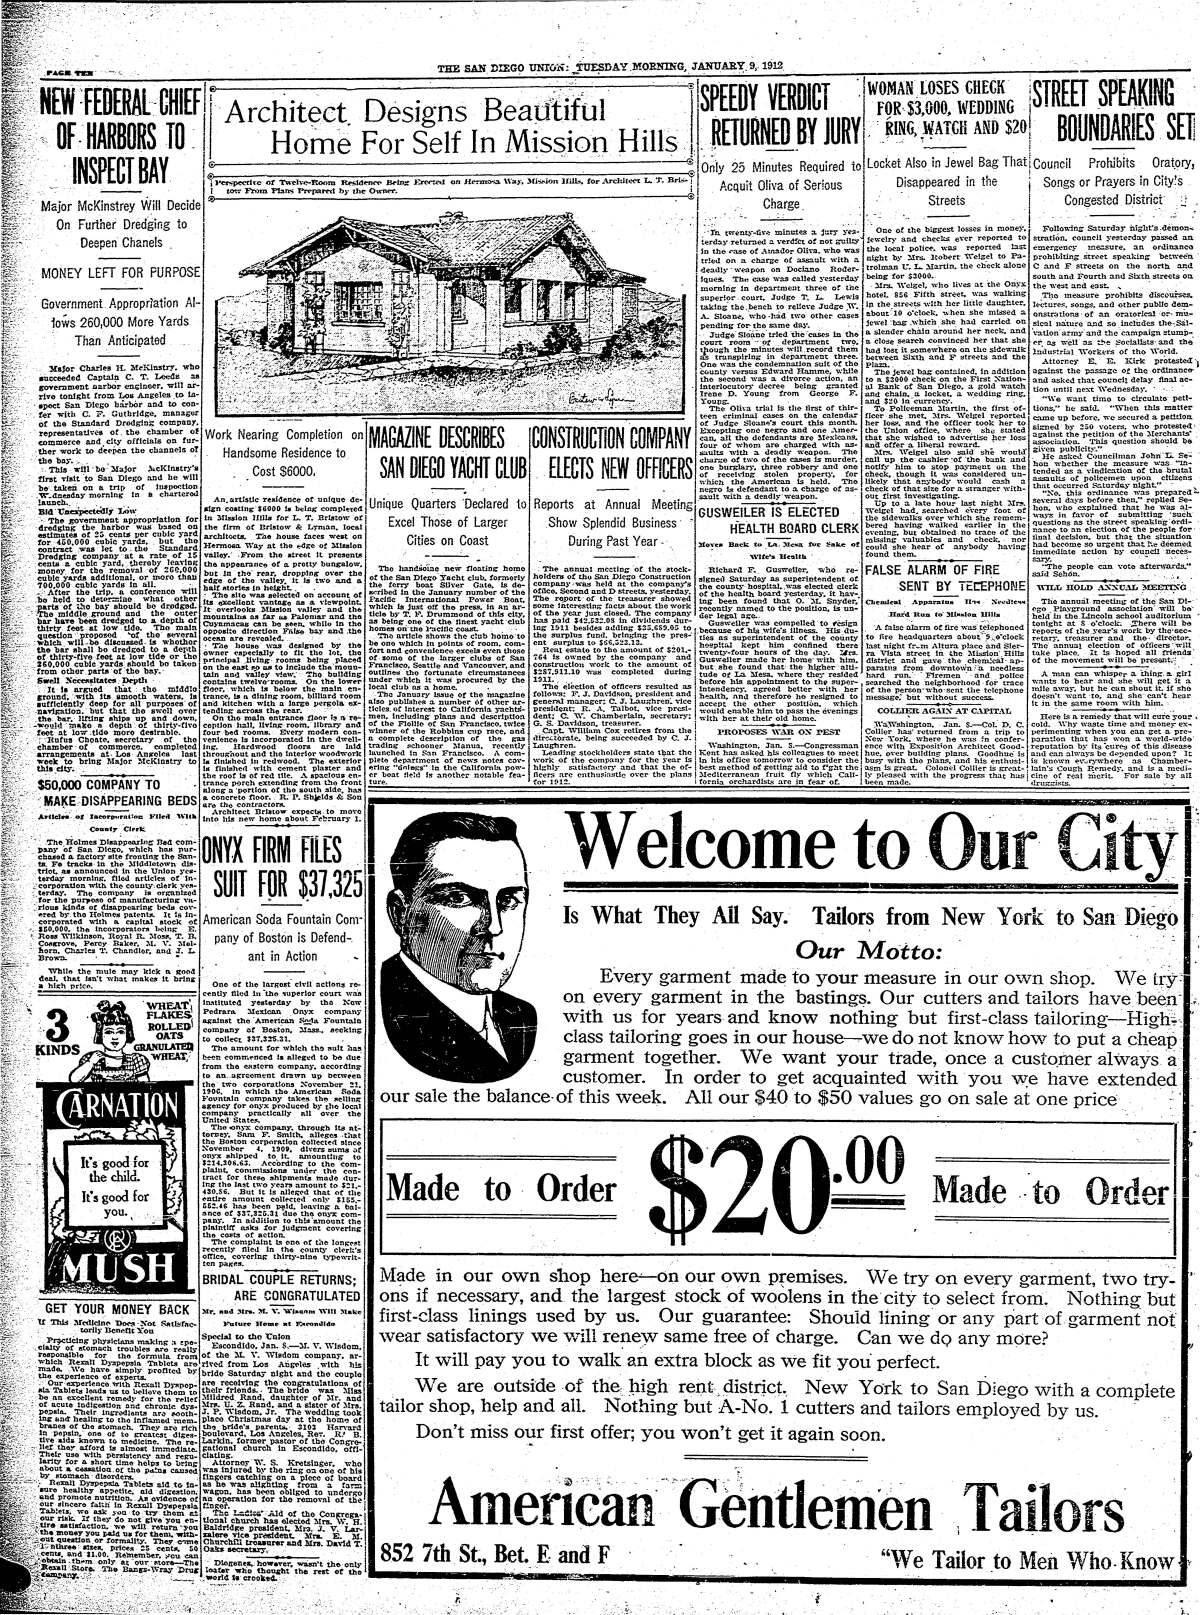 January 9, 1912 page from The San Diego Union.